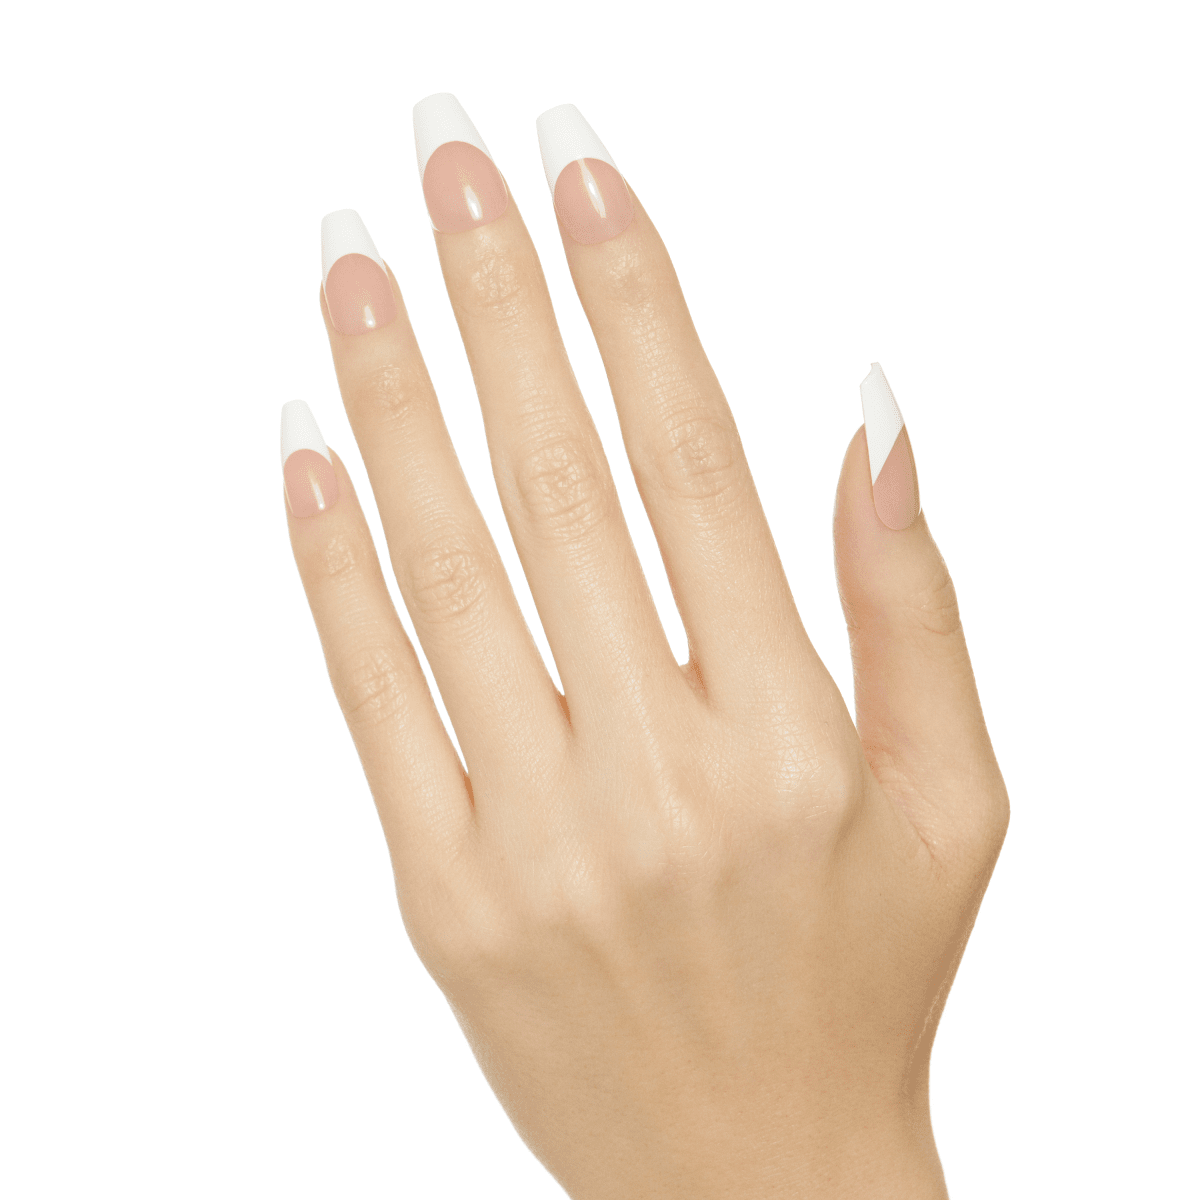 How Thick Should Acrylic Nails Be? - Beauty Beyond Fame